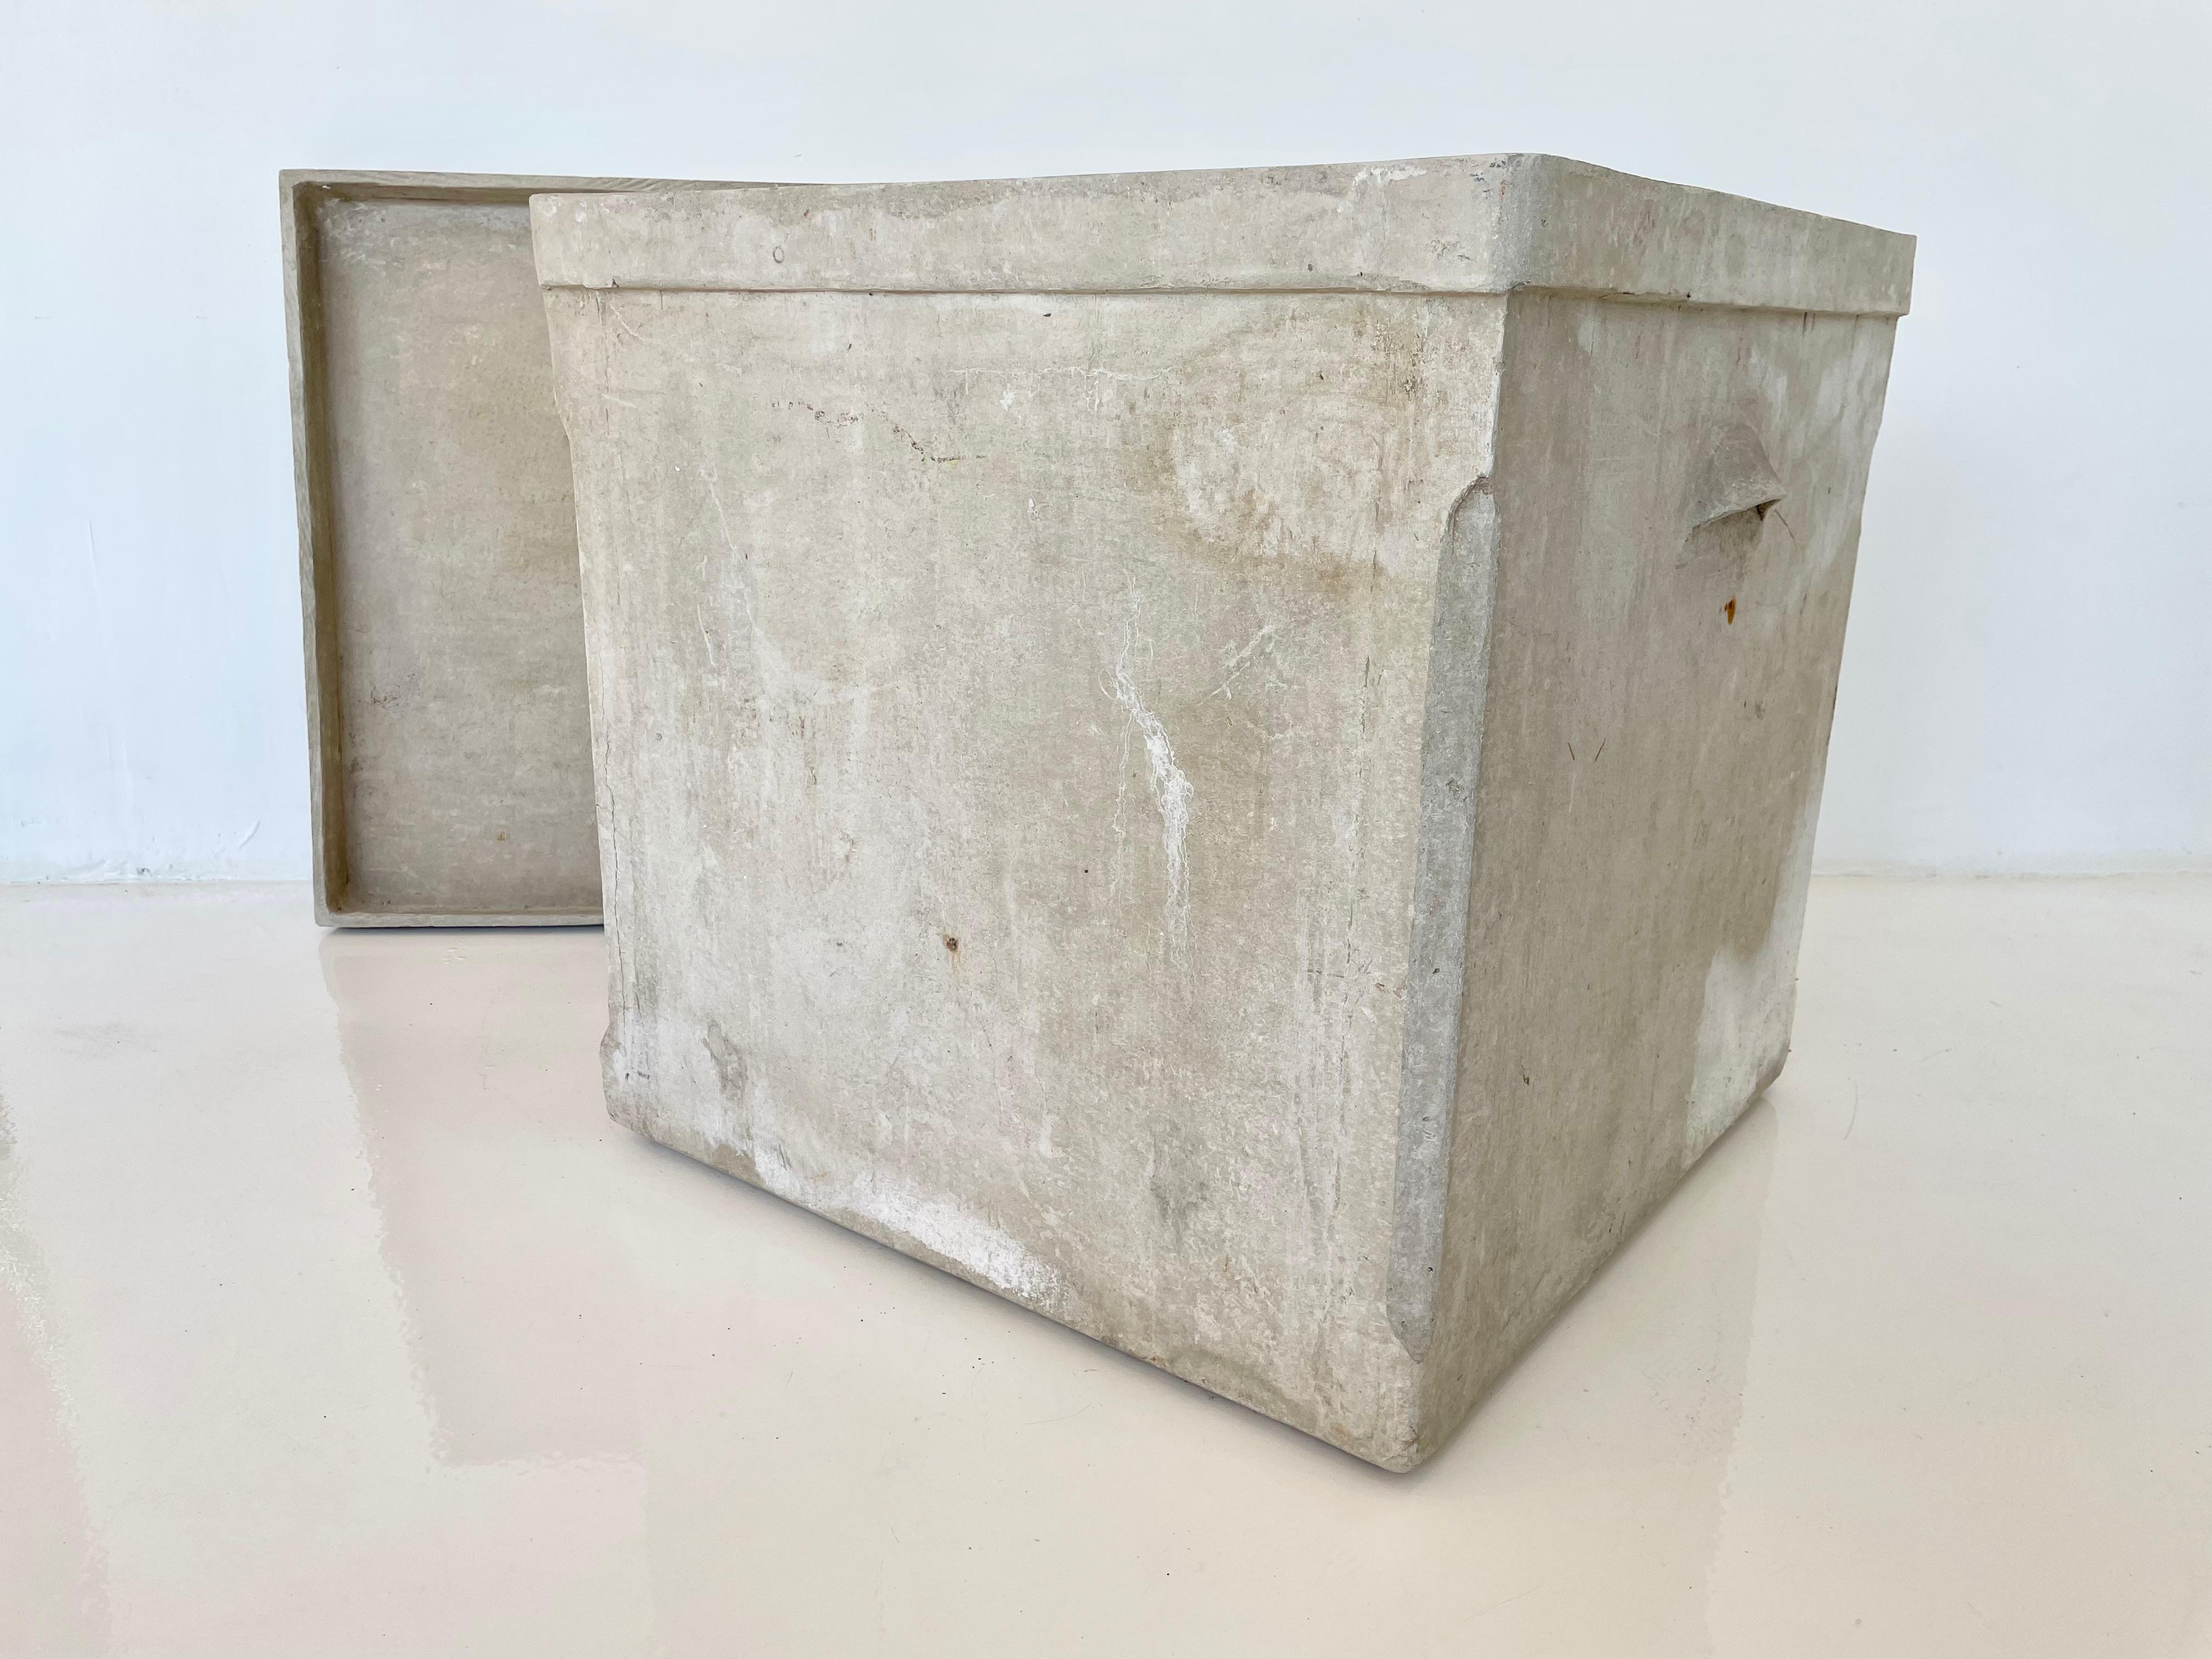 Swiss Willy Guhl Concrete Box with Lid, 1960s Switzerland For Sale